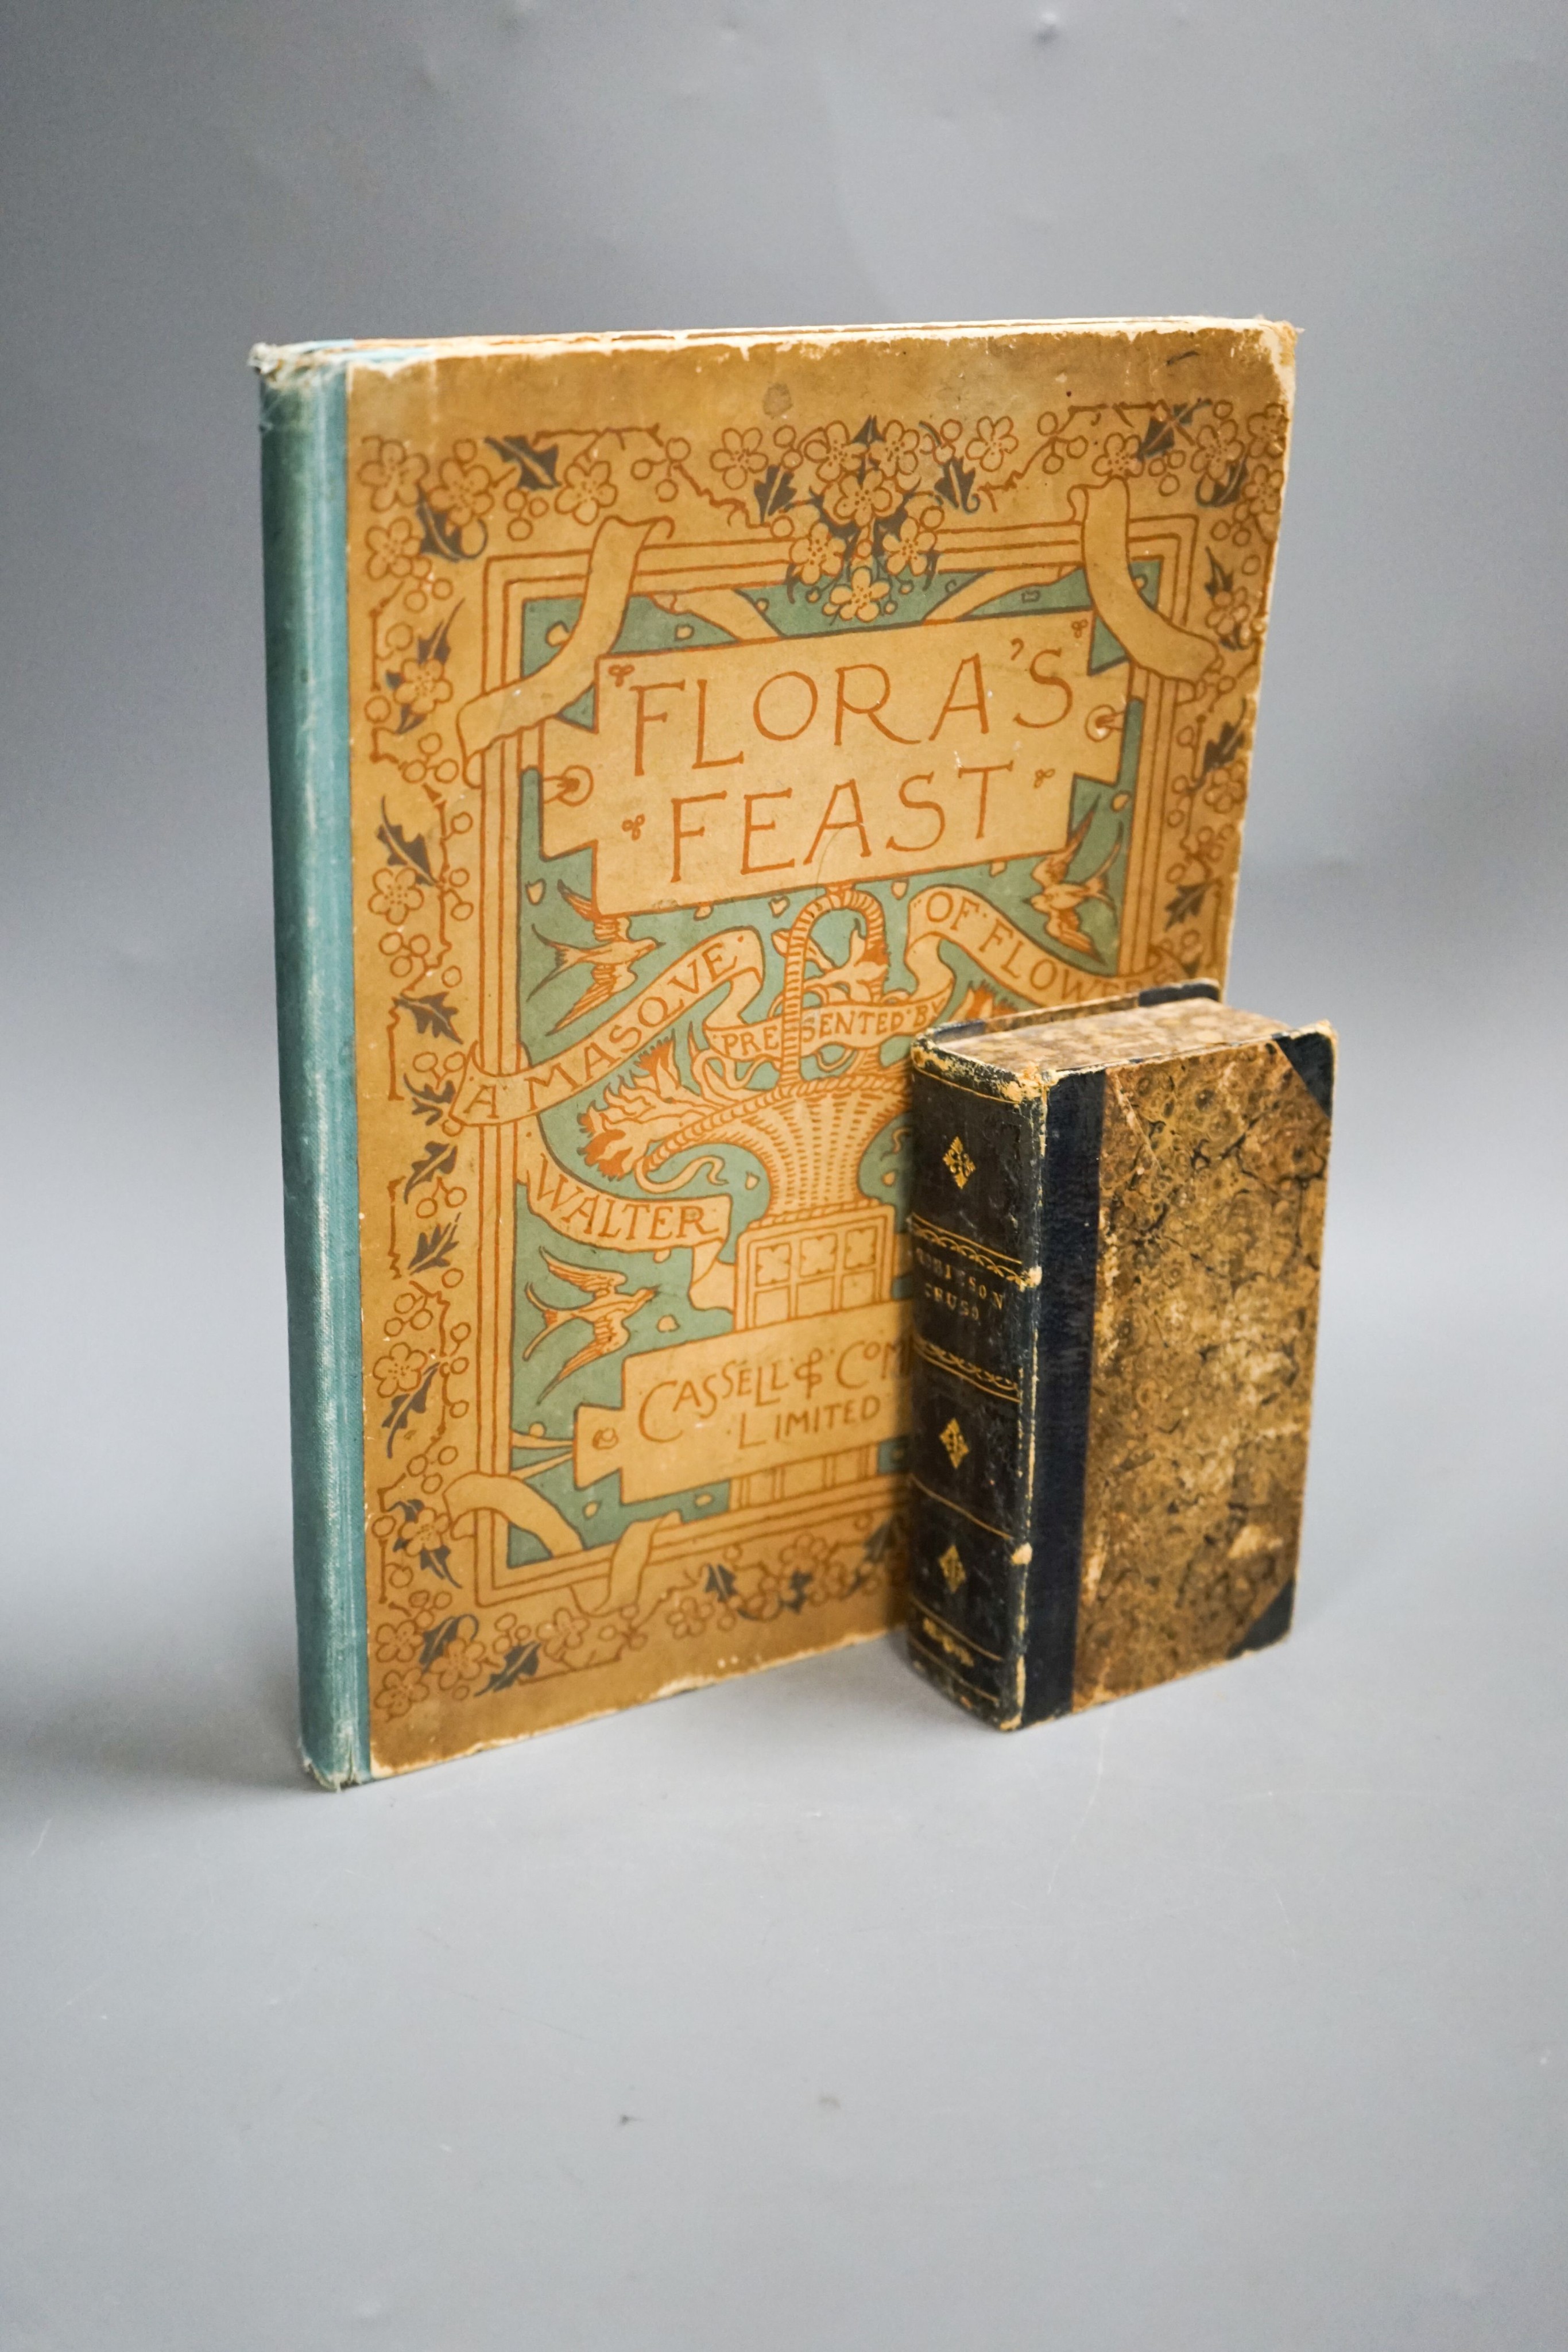 The adventures of Robinson Crusoe 1808 and Flora's Feast (2)